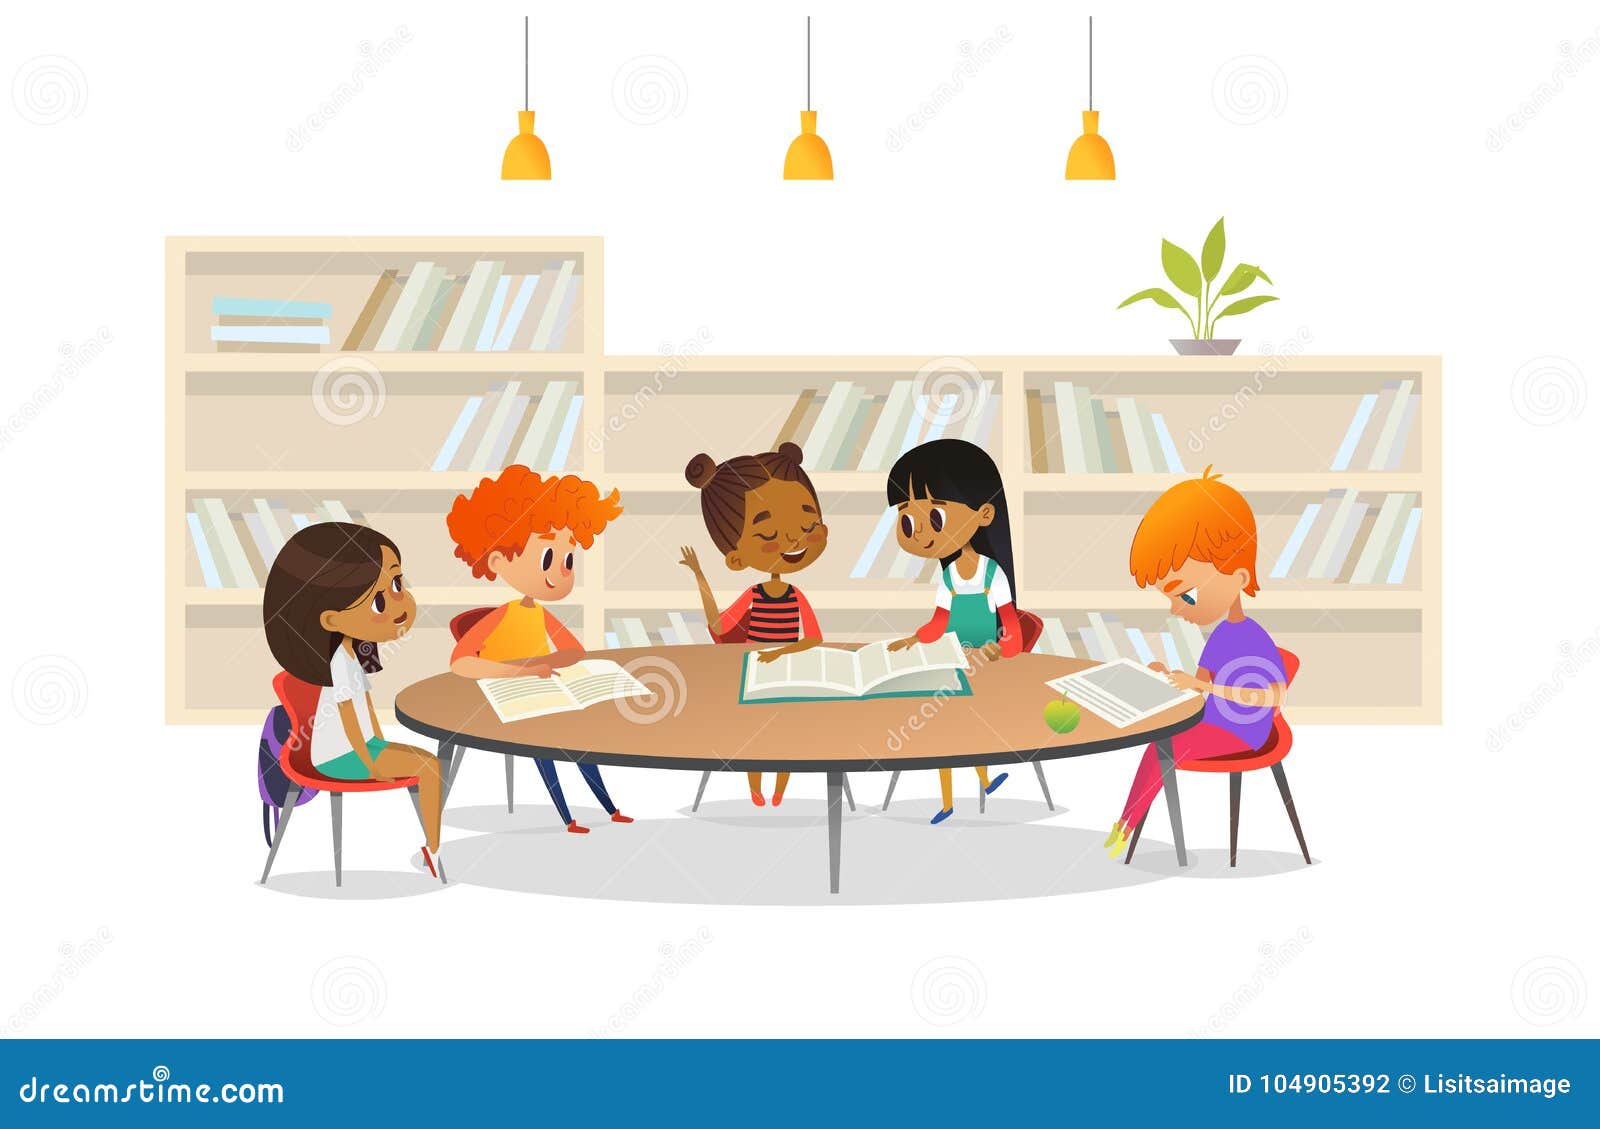 group of children sitting around table at school library and listening to girl reading book out loud against bookcase or